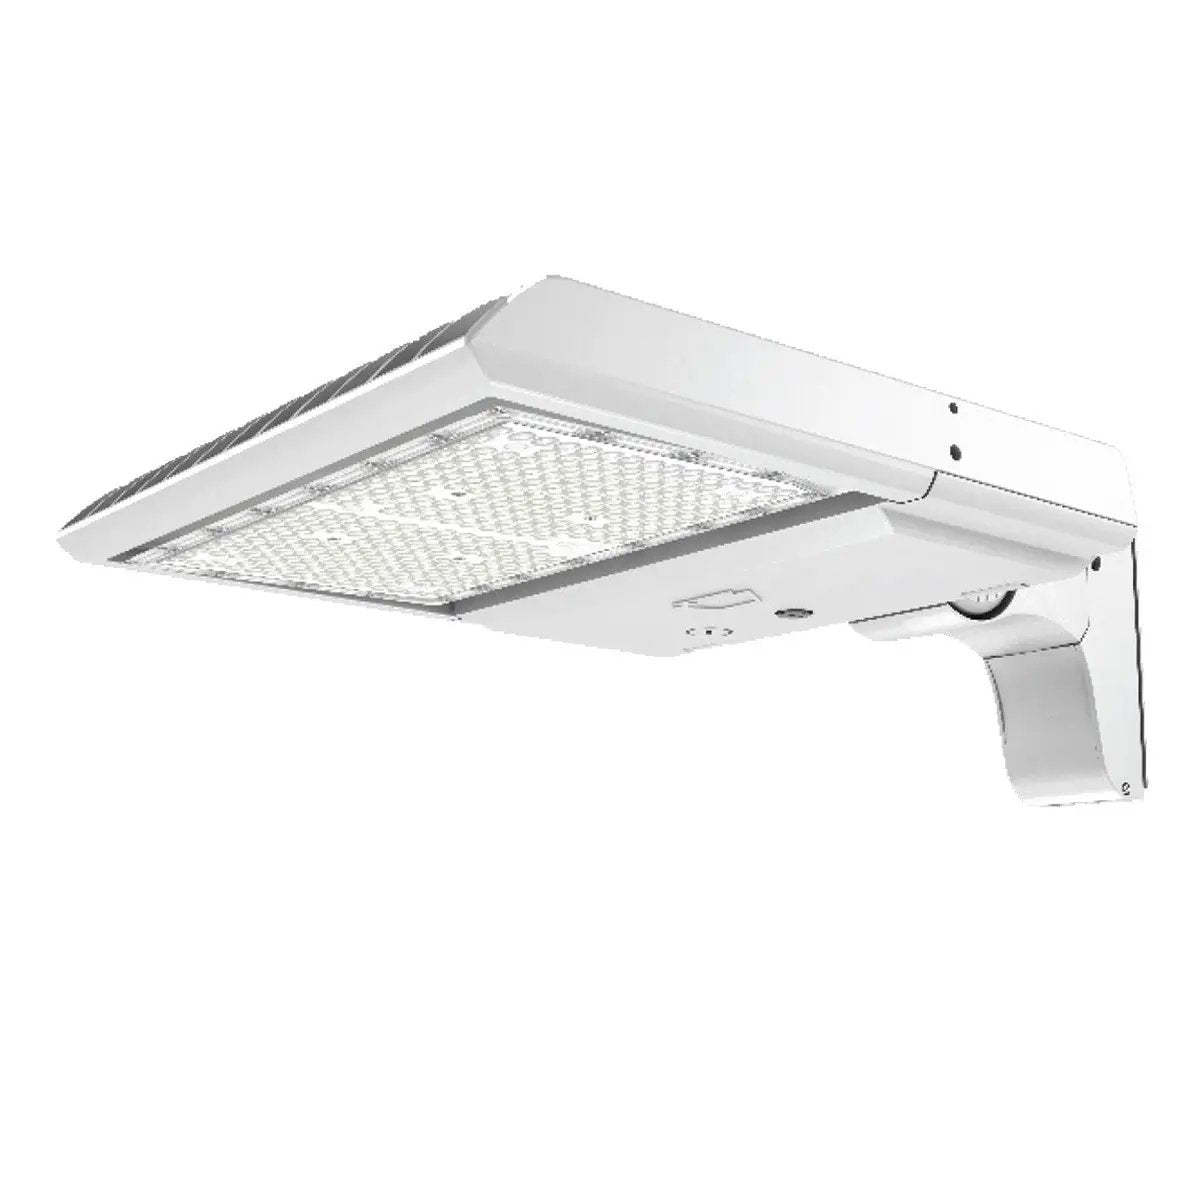 LED Area Light with wattage and color select technology, providing energy-saving, controllable illumination. UL Listed, RoHS Compliant, IP65 Rated, DLC Premium Listed. 23.23"L x 13.11"W x 6.7"H. 50,000 rated hours, 5-year warranty.